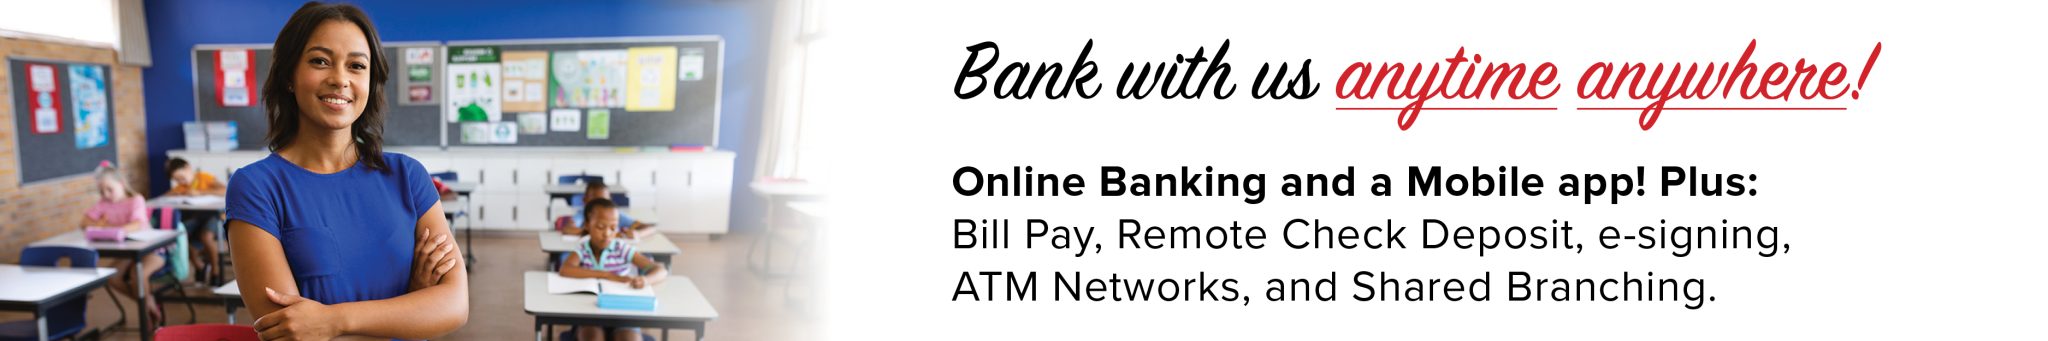 Bank with us anytime anywhere with online/mobile banking.